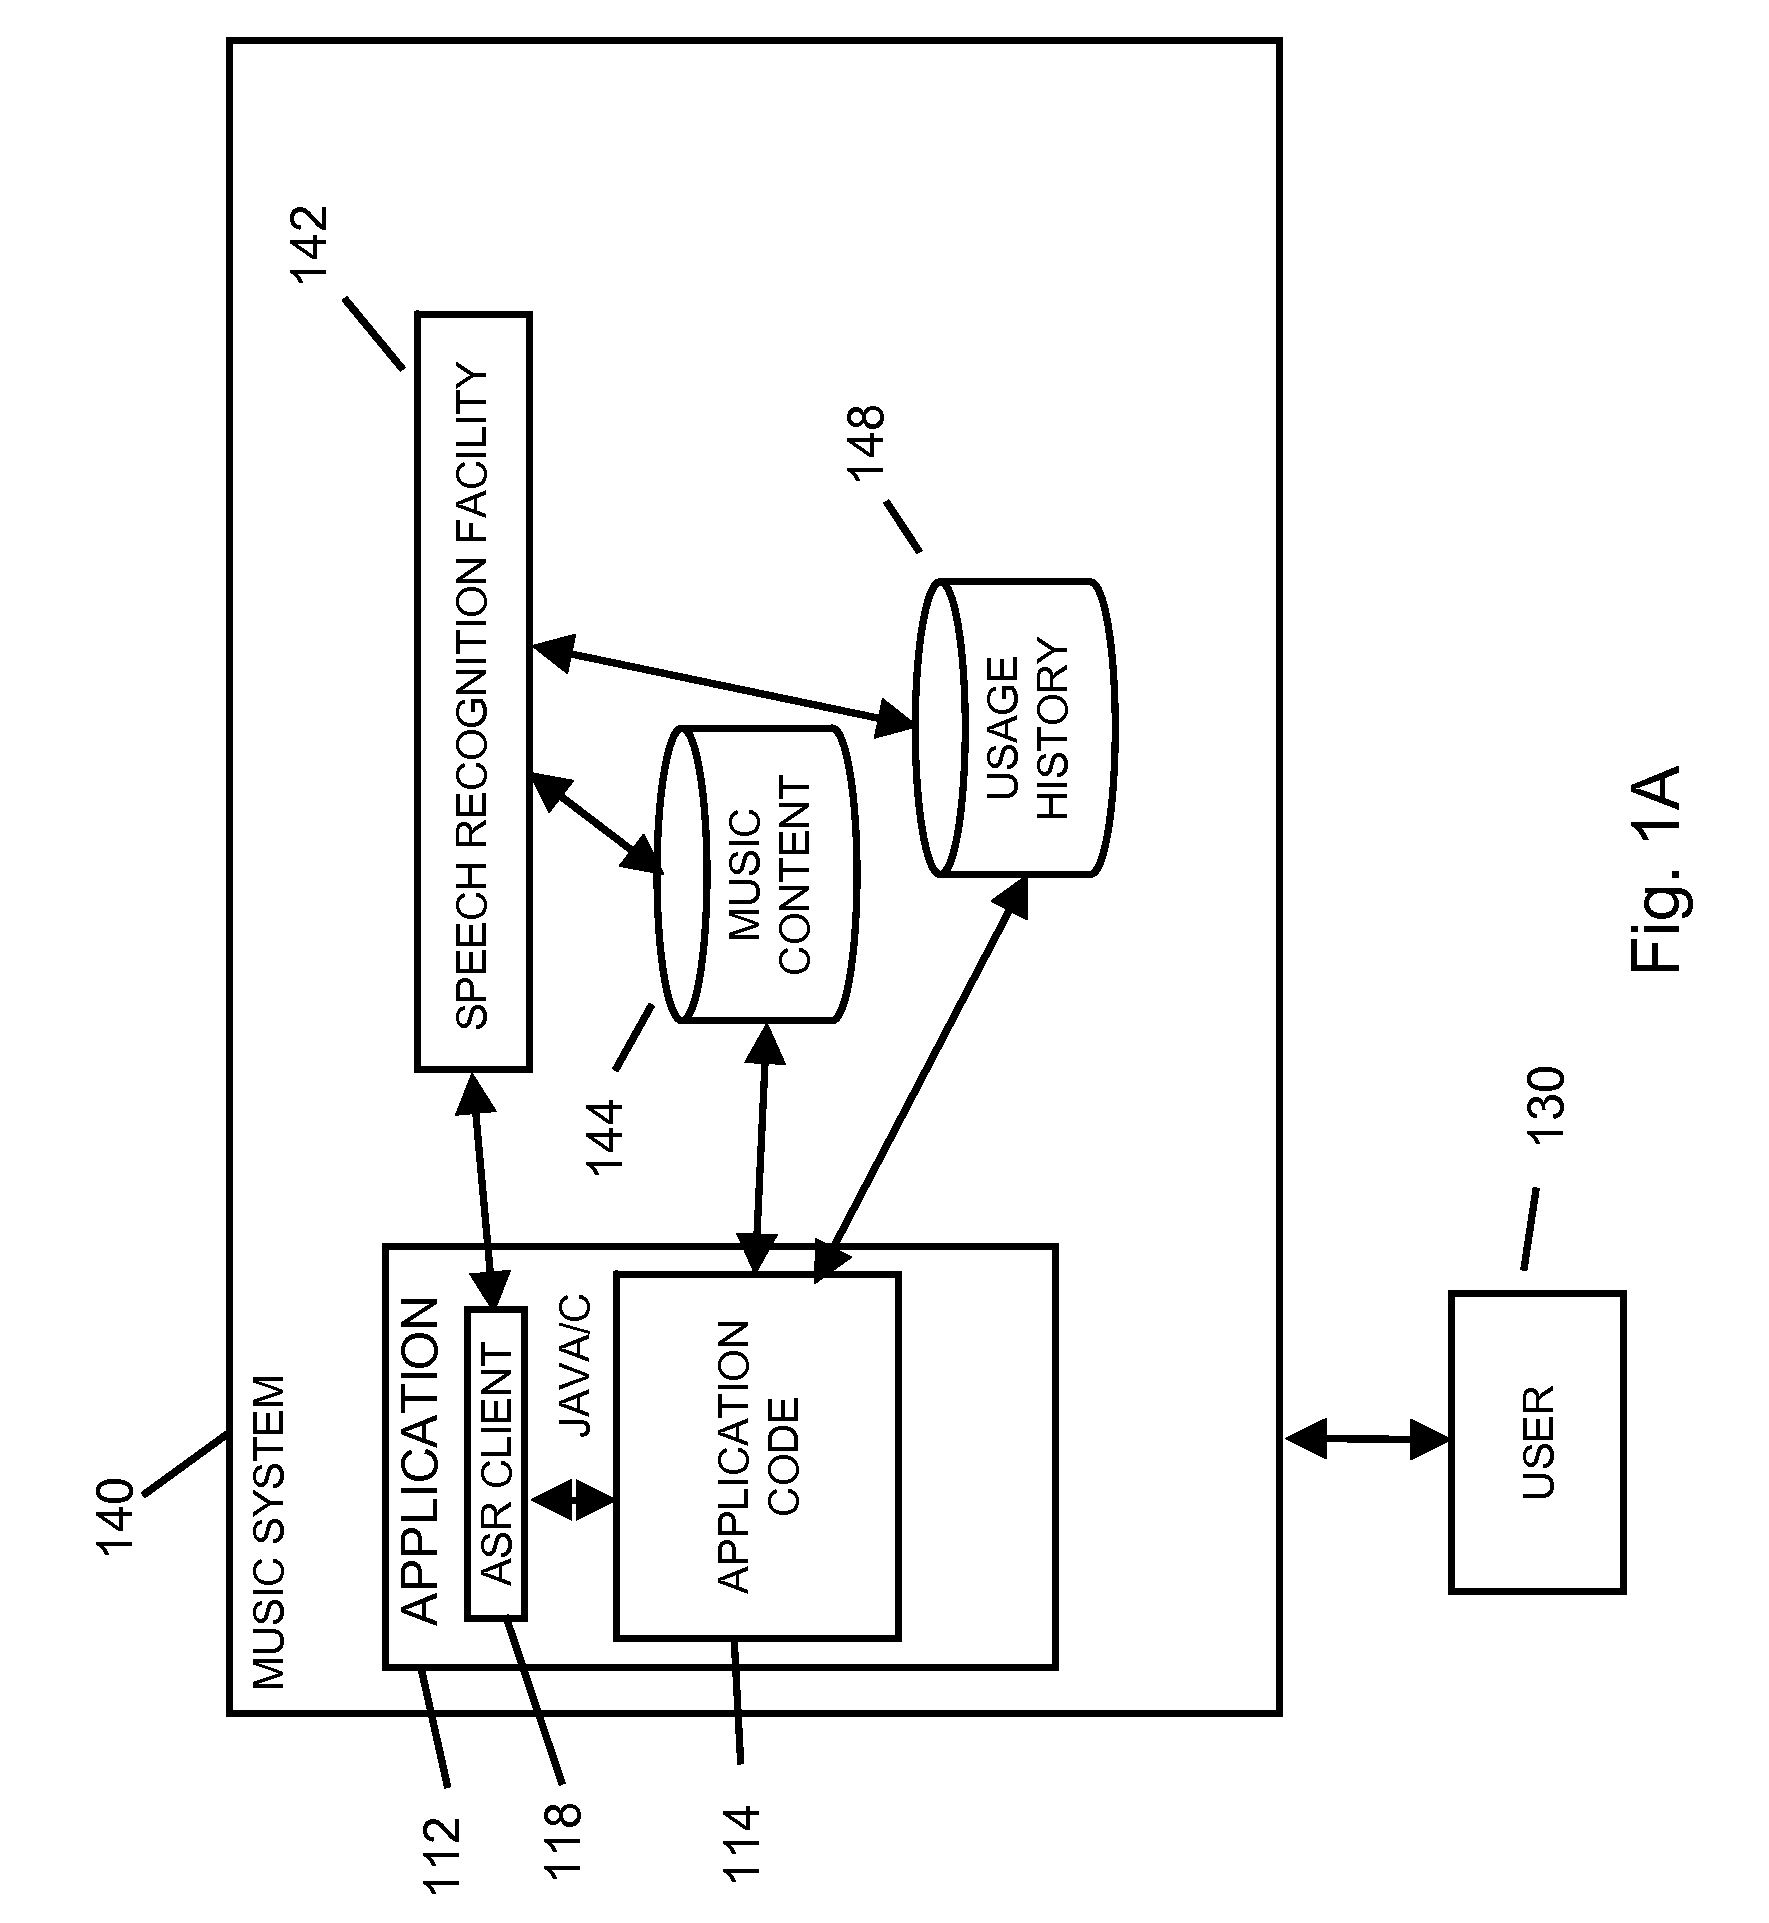 Using speech recognition results based on an unstructured language model in a mobile communication facility application